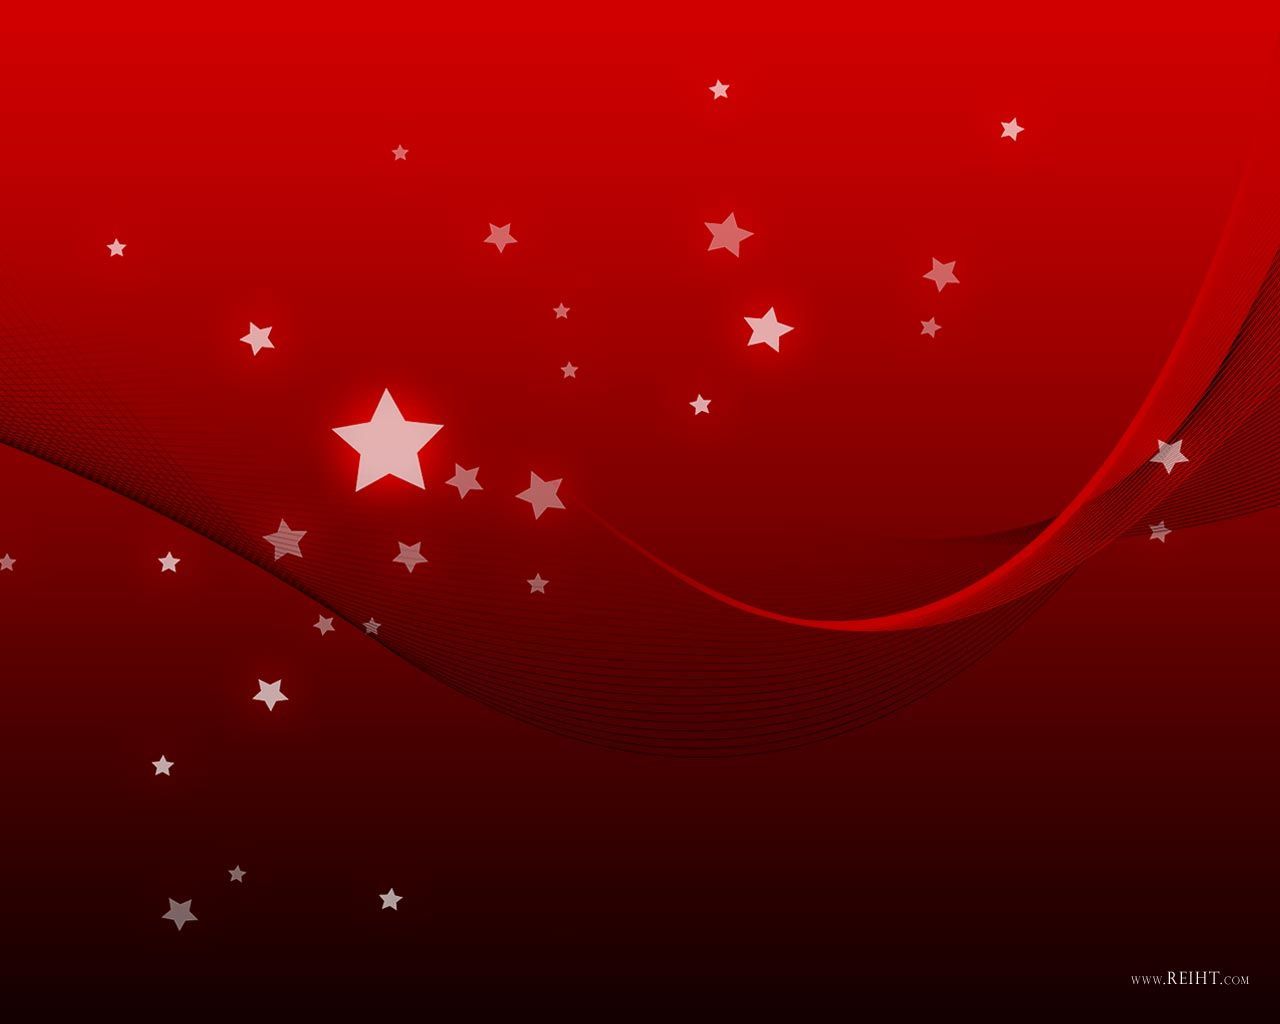 Red 3d hd background red 3d wallpapers | Black Background and some ...